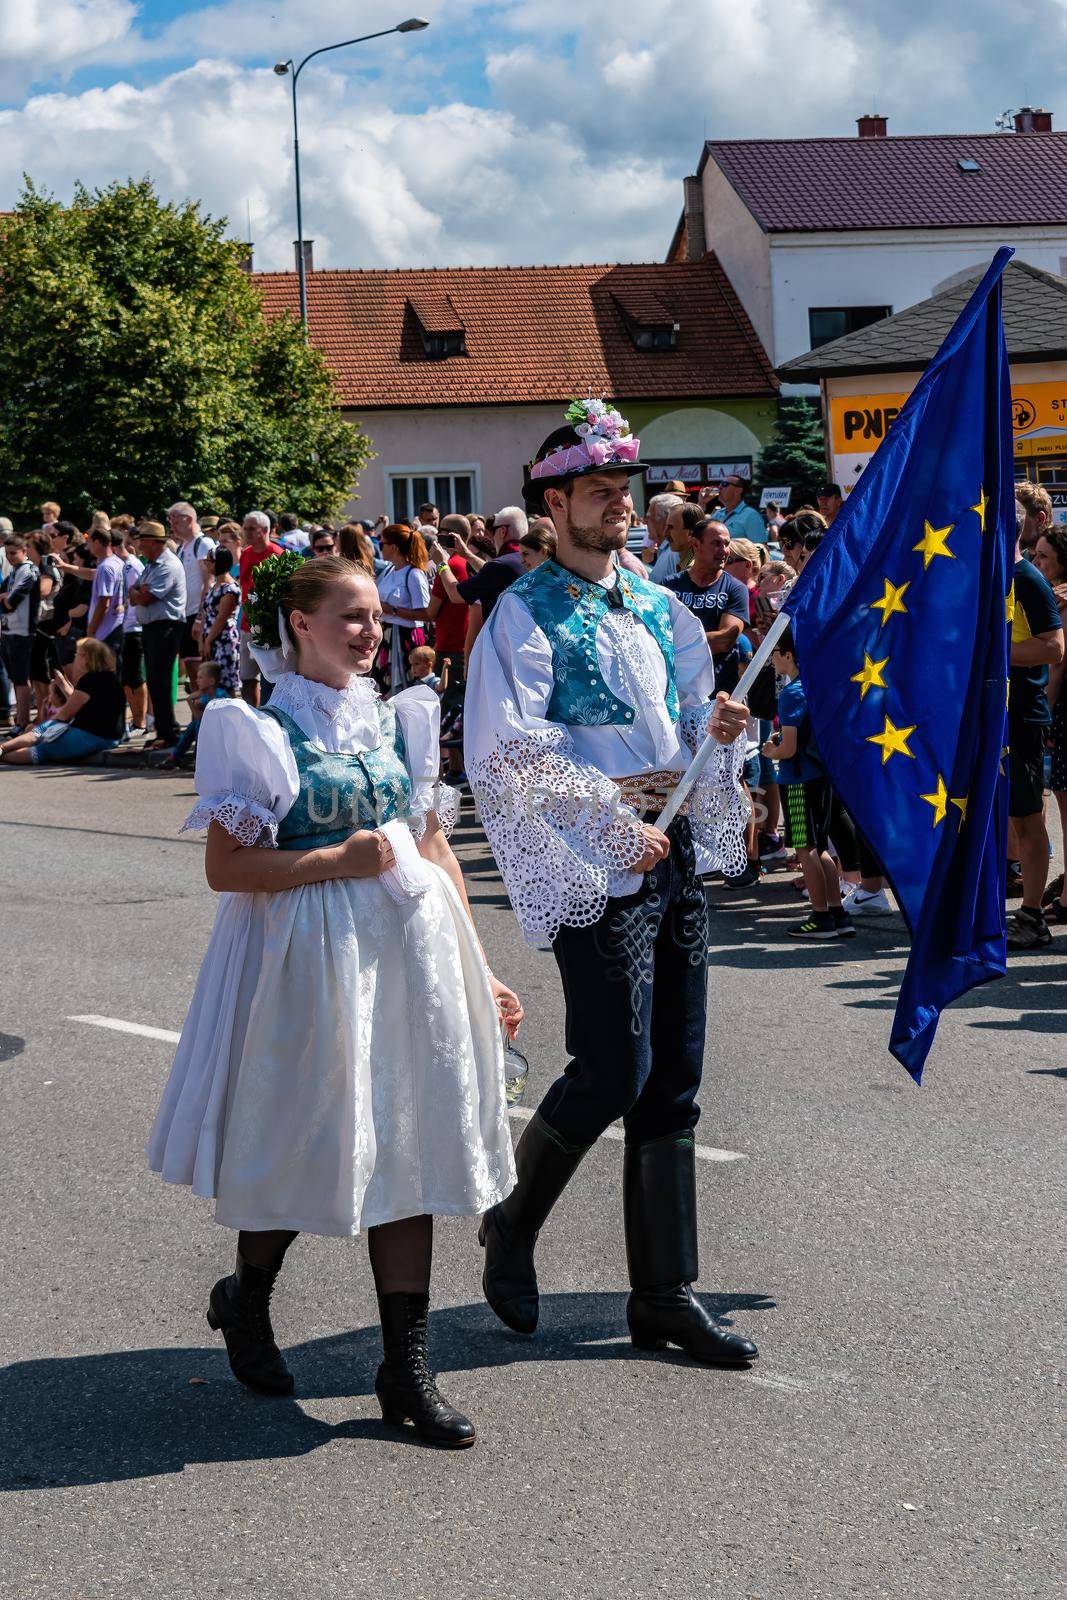 Boy and girl with the EU flag in folk costumes by rostik924